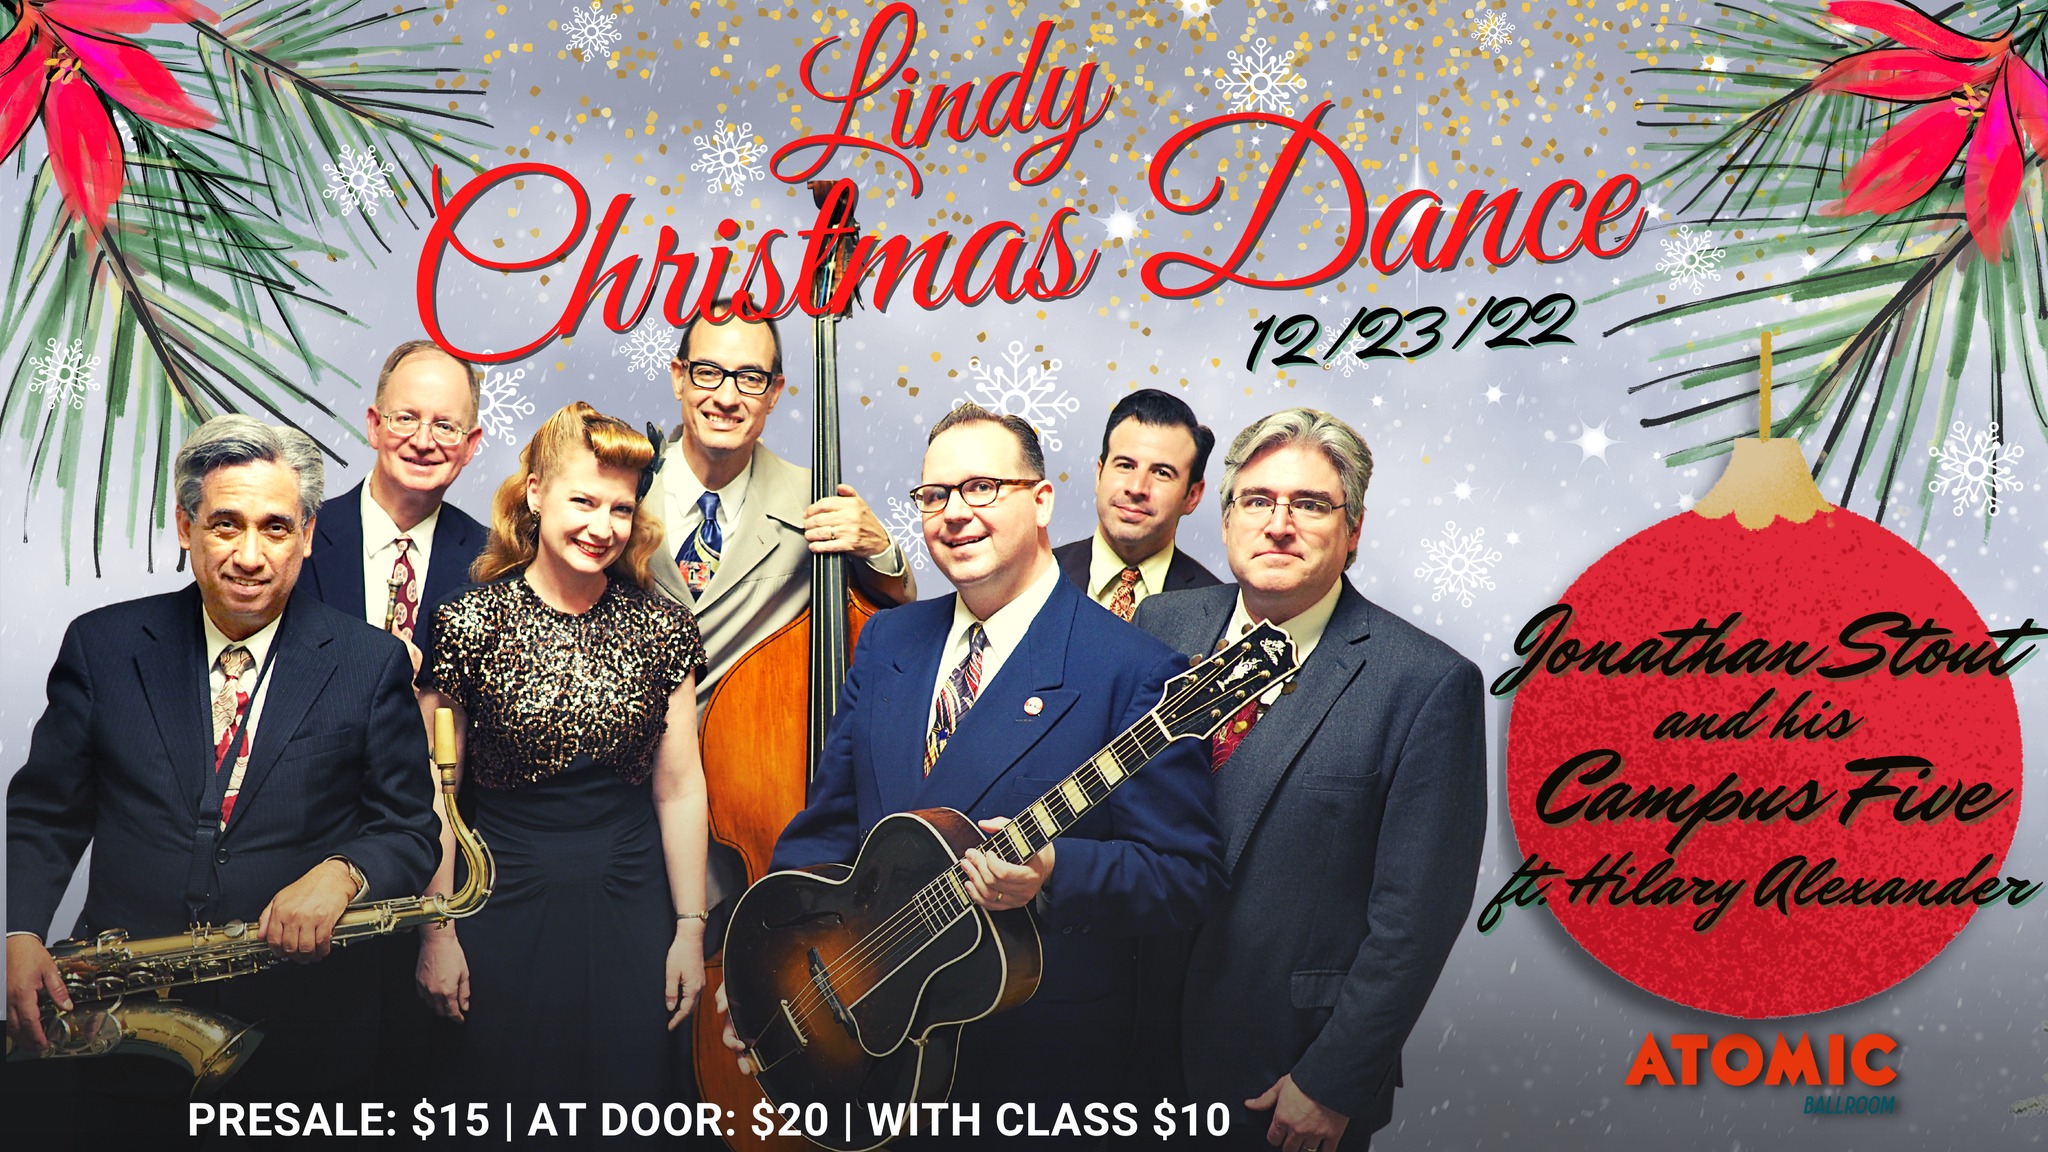 Lindy Christmas Dance at Atomic Ballroom with the Campus Five